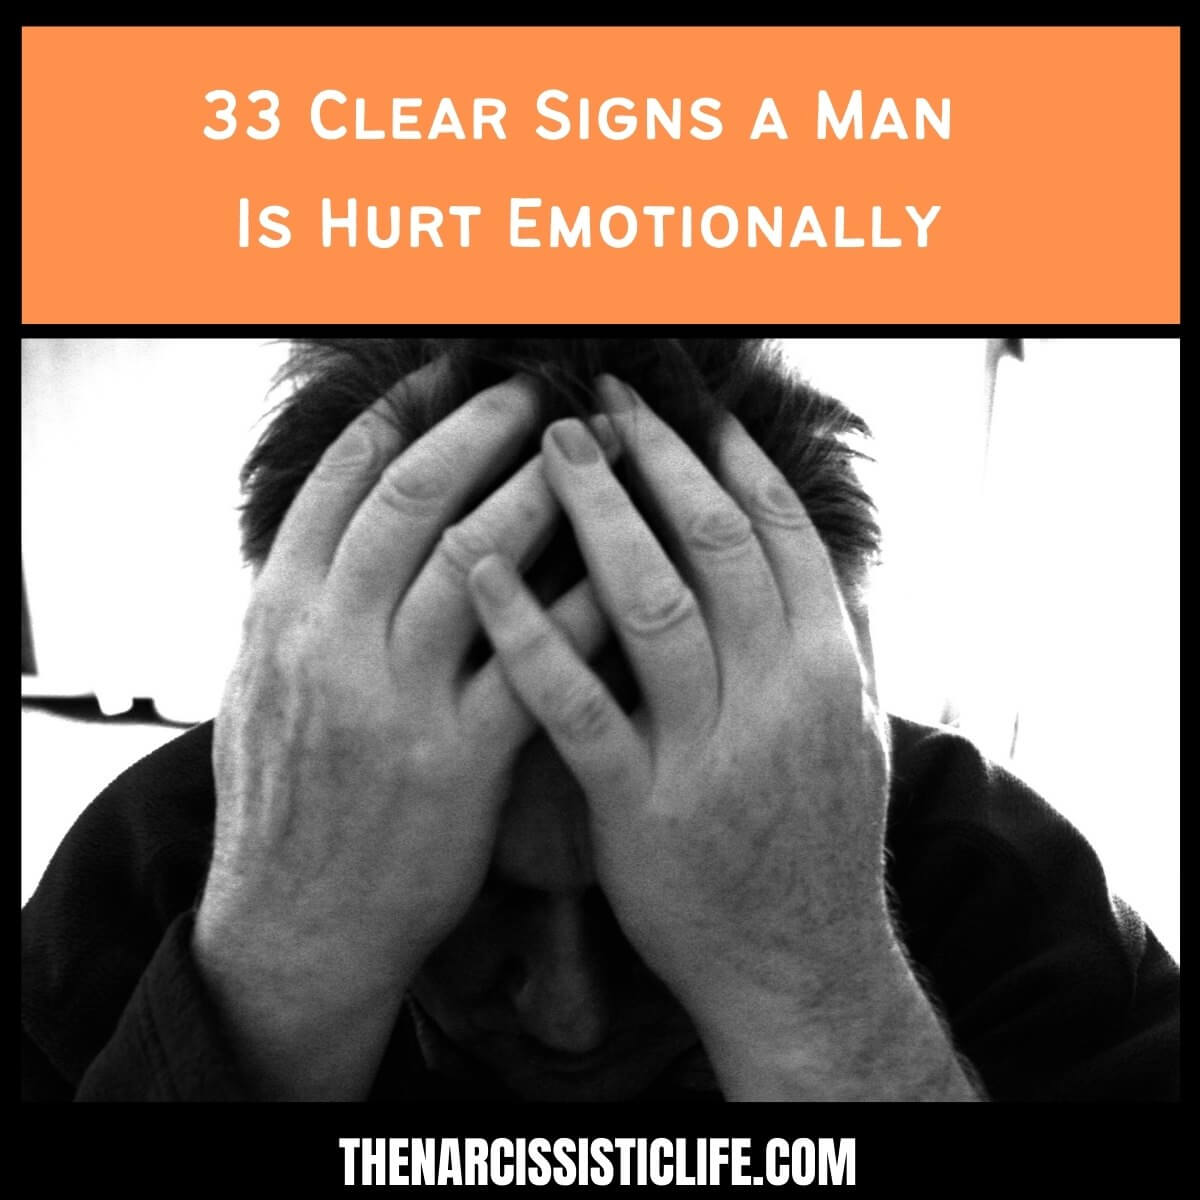 33 Clear Signs a Man Is Hurt Emotionally